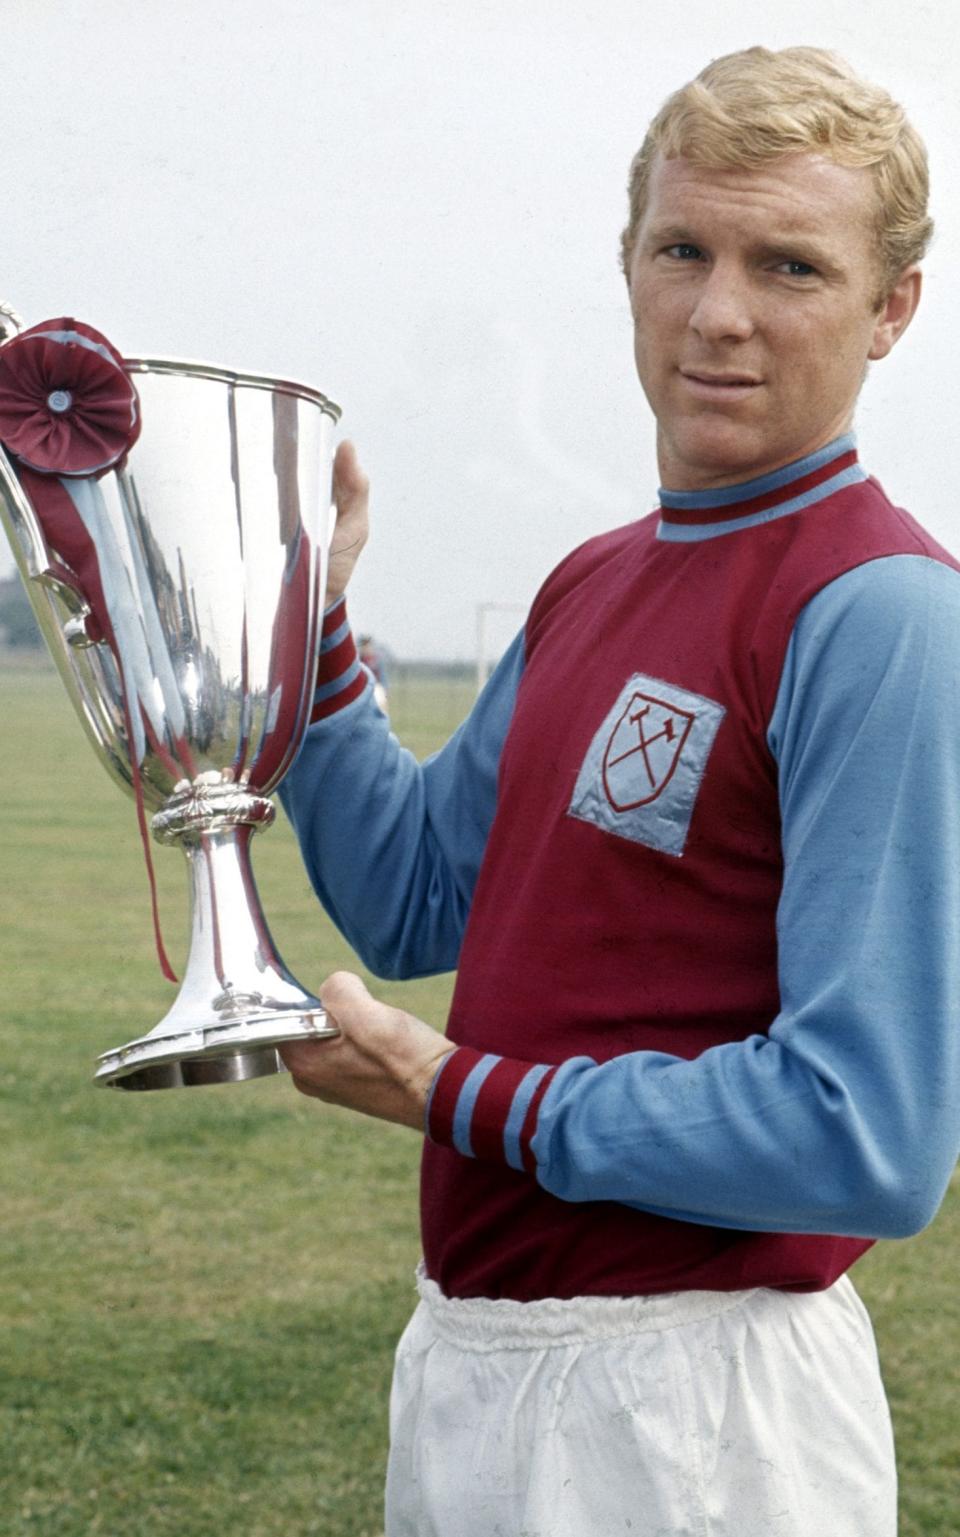 West Ham Captain Bobby Moore shows the European Cup Winners Cup trophy in 1965 - Brian Dear interview: ‘We were mainly from Barking, Dagenham, East Ham’ – West Ham’s European win - Mirrorpix/Malcolm McNeill